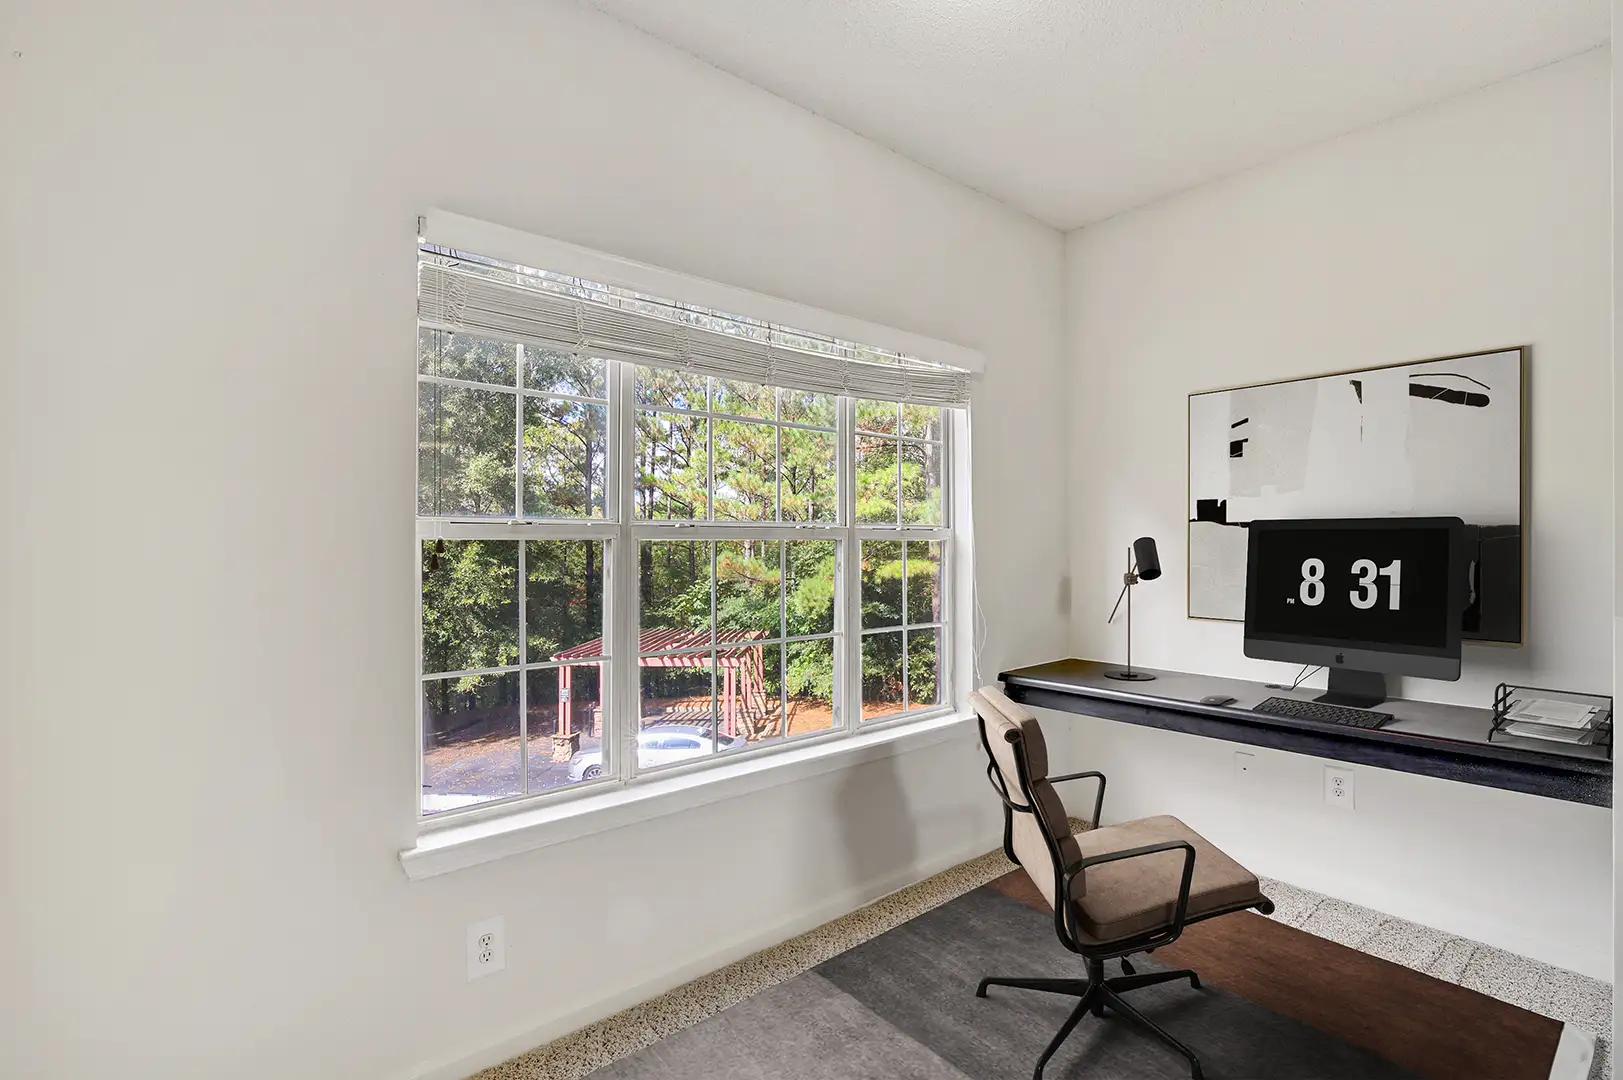 Model office space with large windows